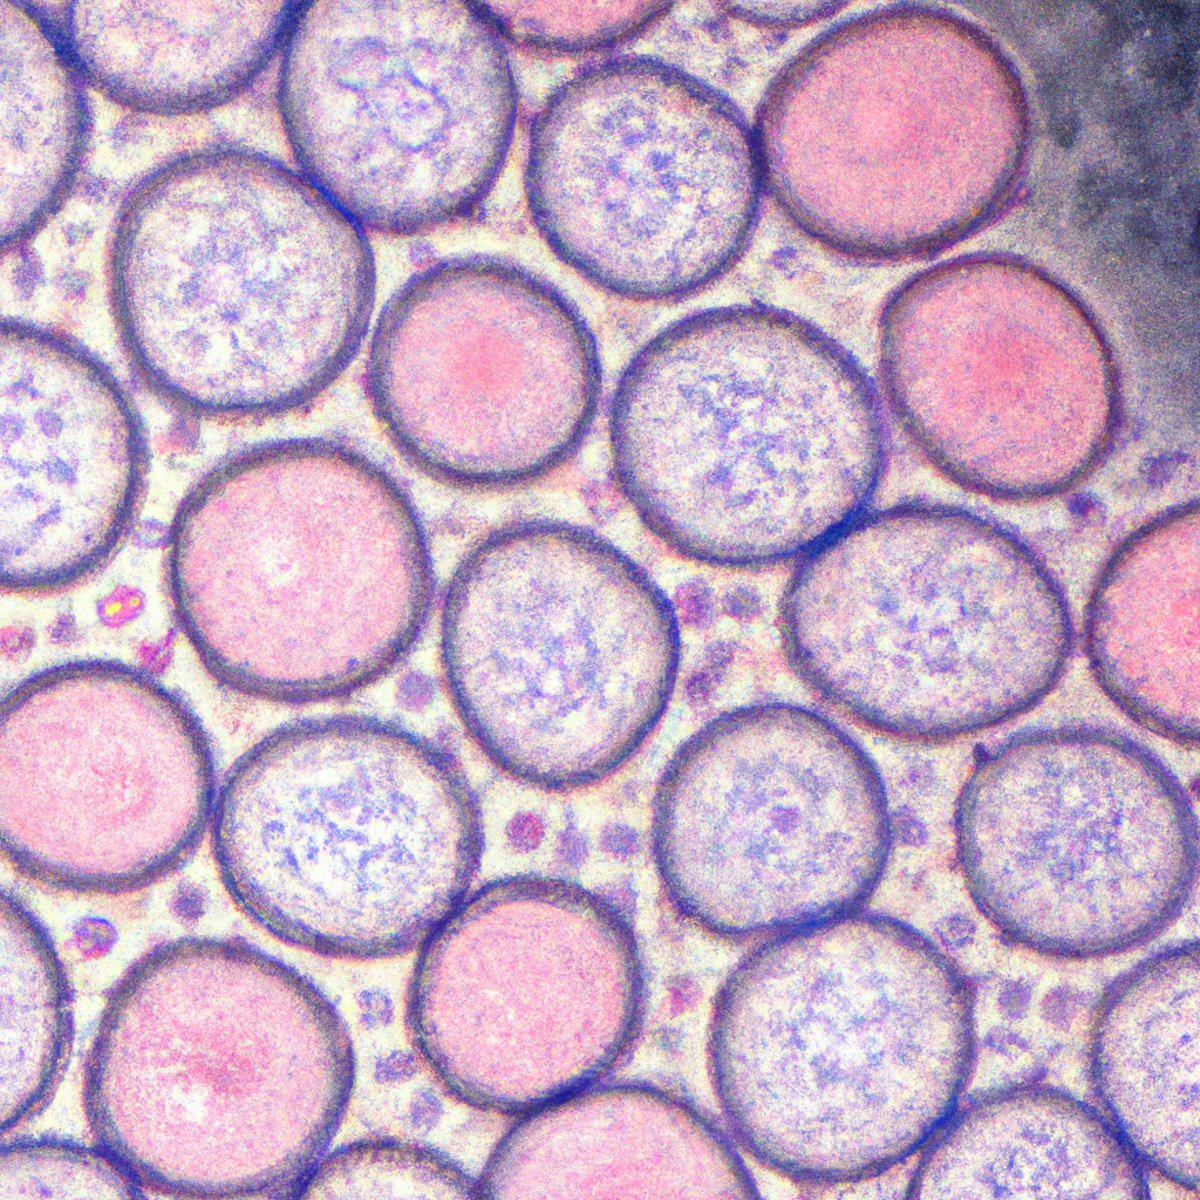 Close-up photo of Langerhans cells on microscope slide, displaying distinct morphology and Birbeck granules.